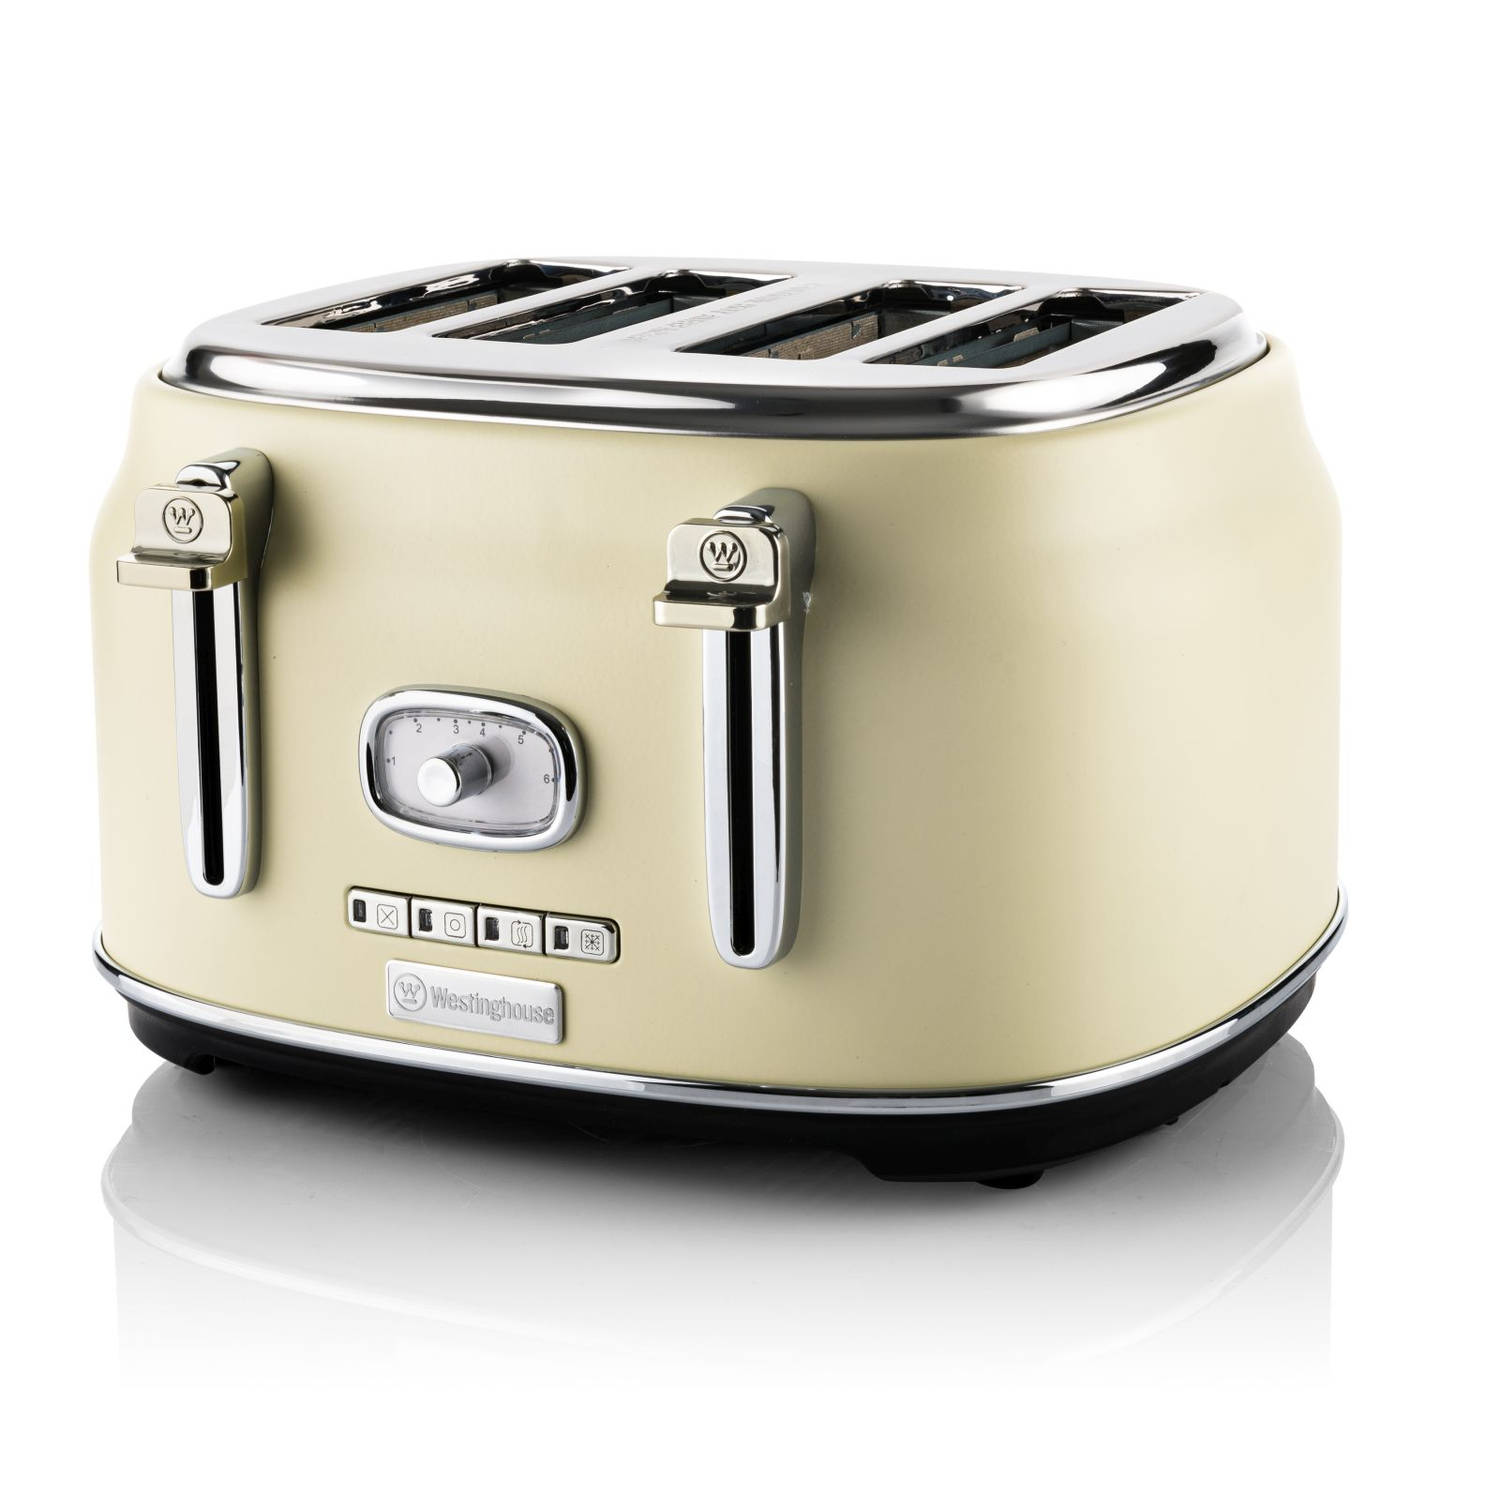 Westinghouse Retro Broodrooster 4 Slice Toaster Wit